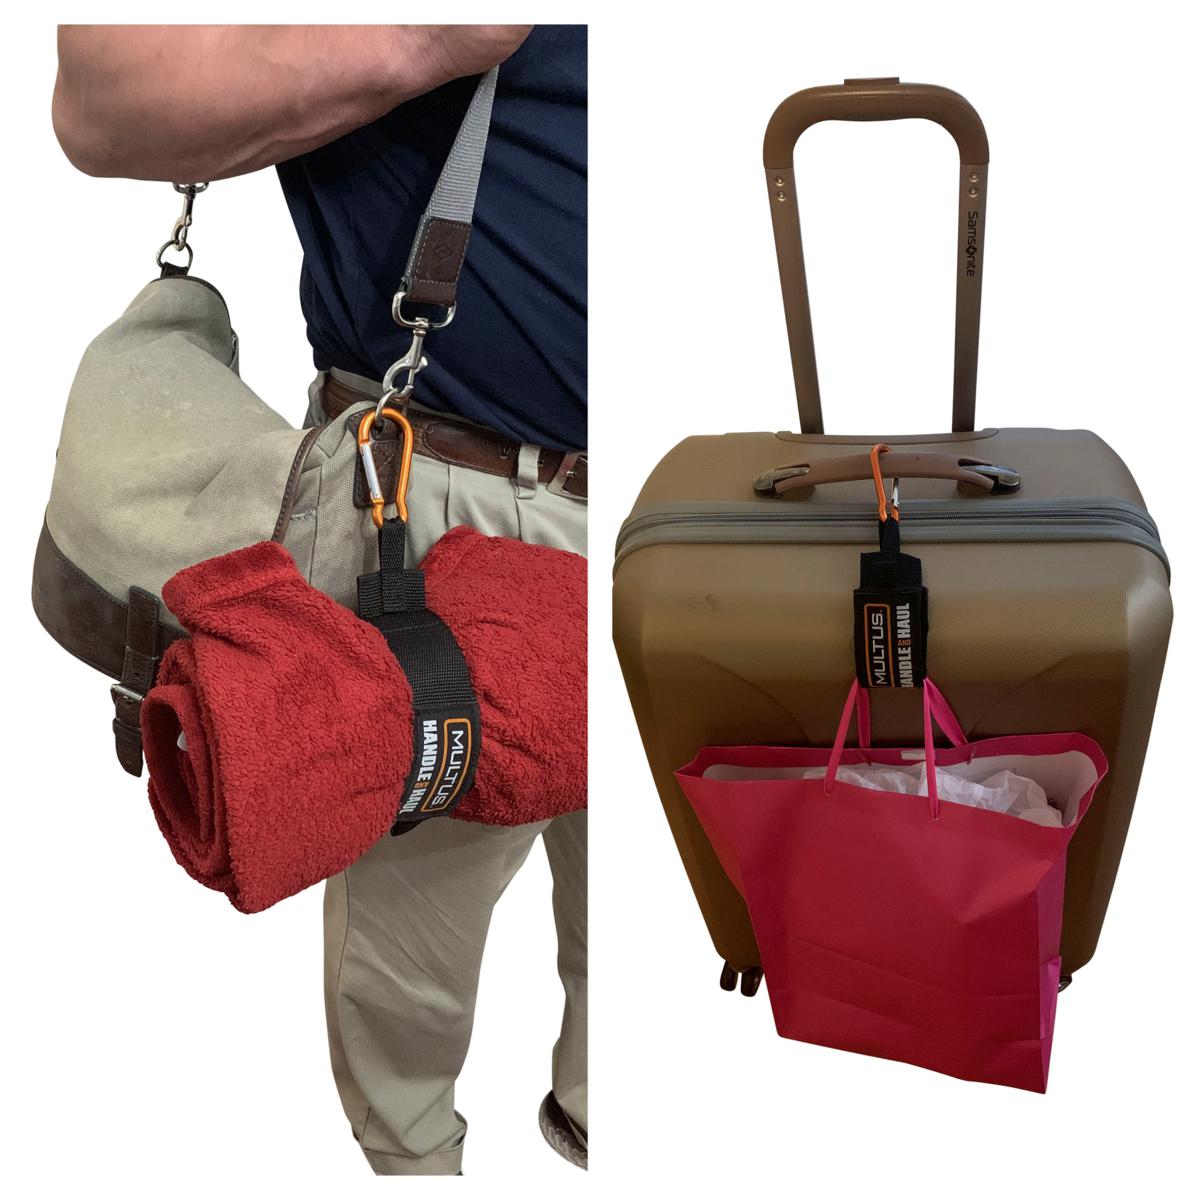 Carry and Storage Hook & Loop Strap - MULTUS: Moving Straps, Drag